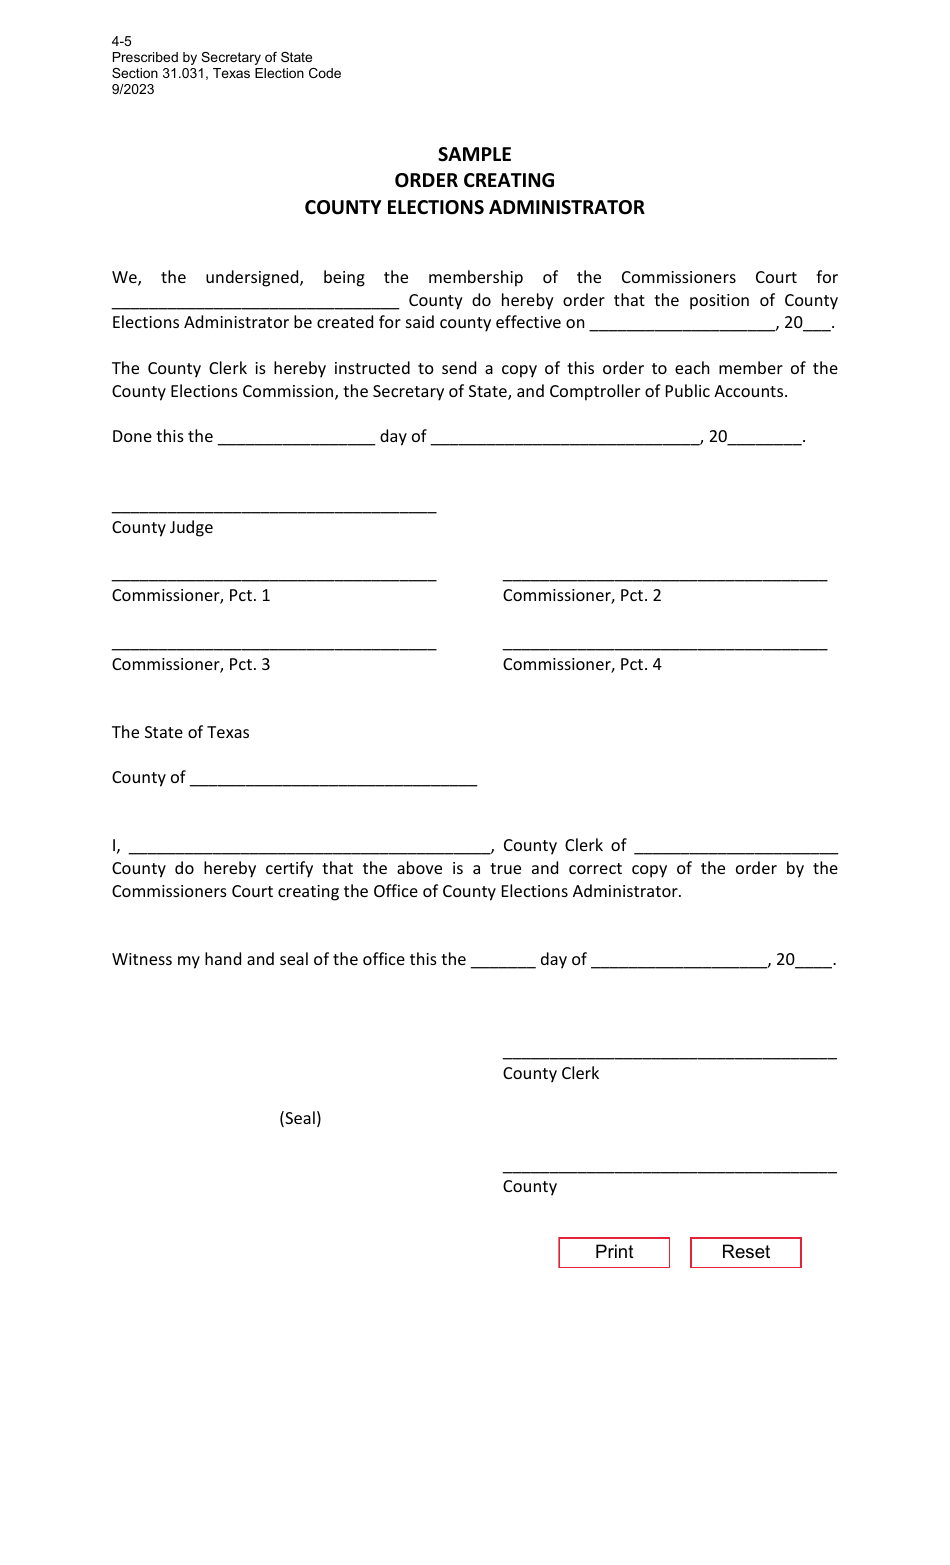 Form 4-5 Order Creating County Elections Administrator - Sample - Texas, Page 1